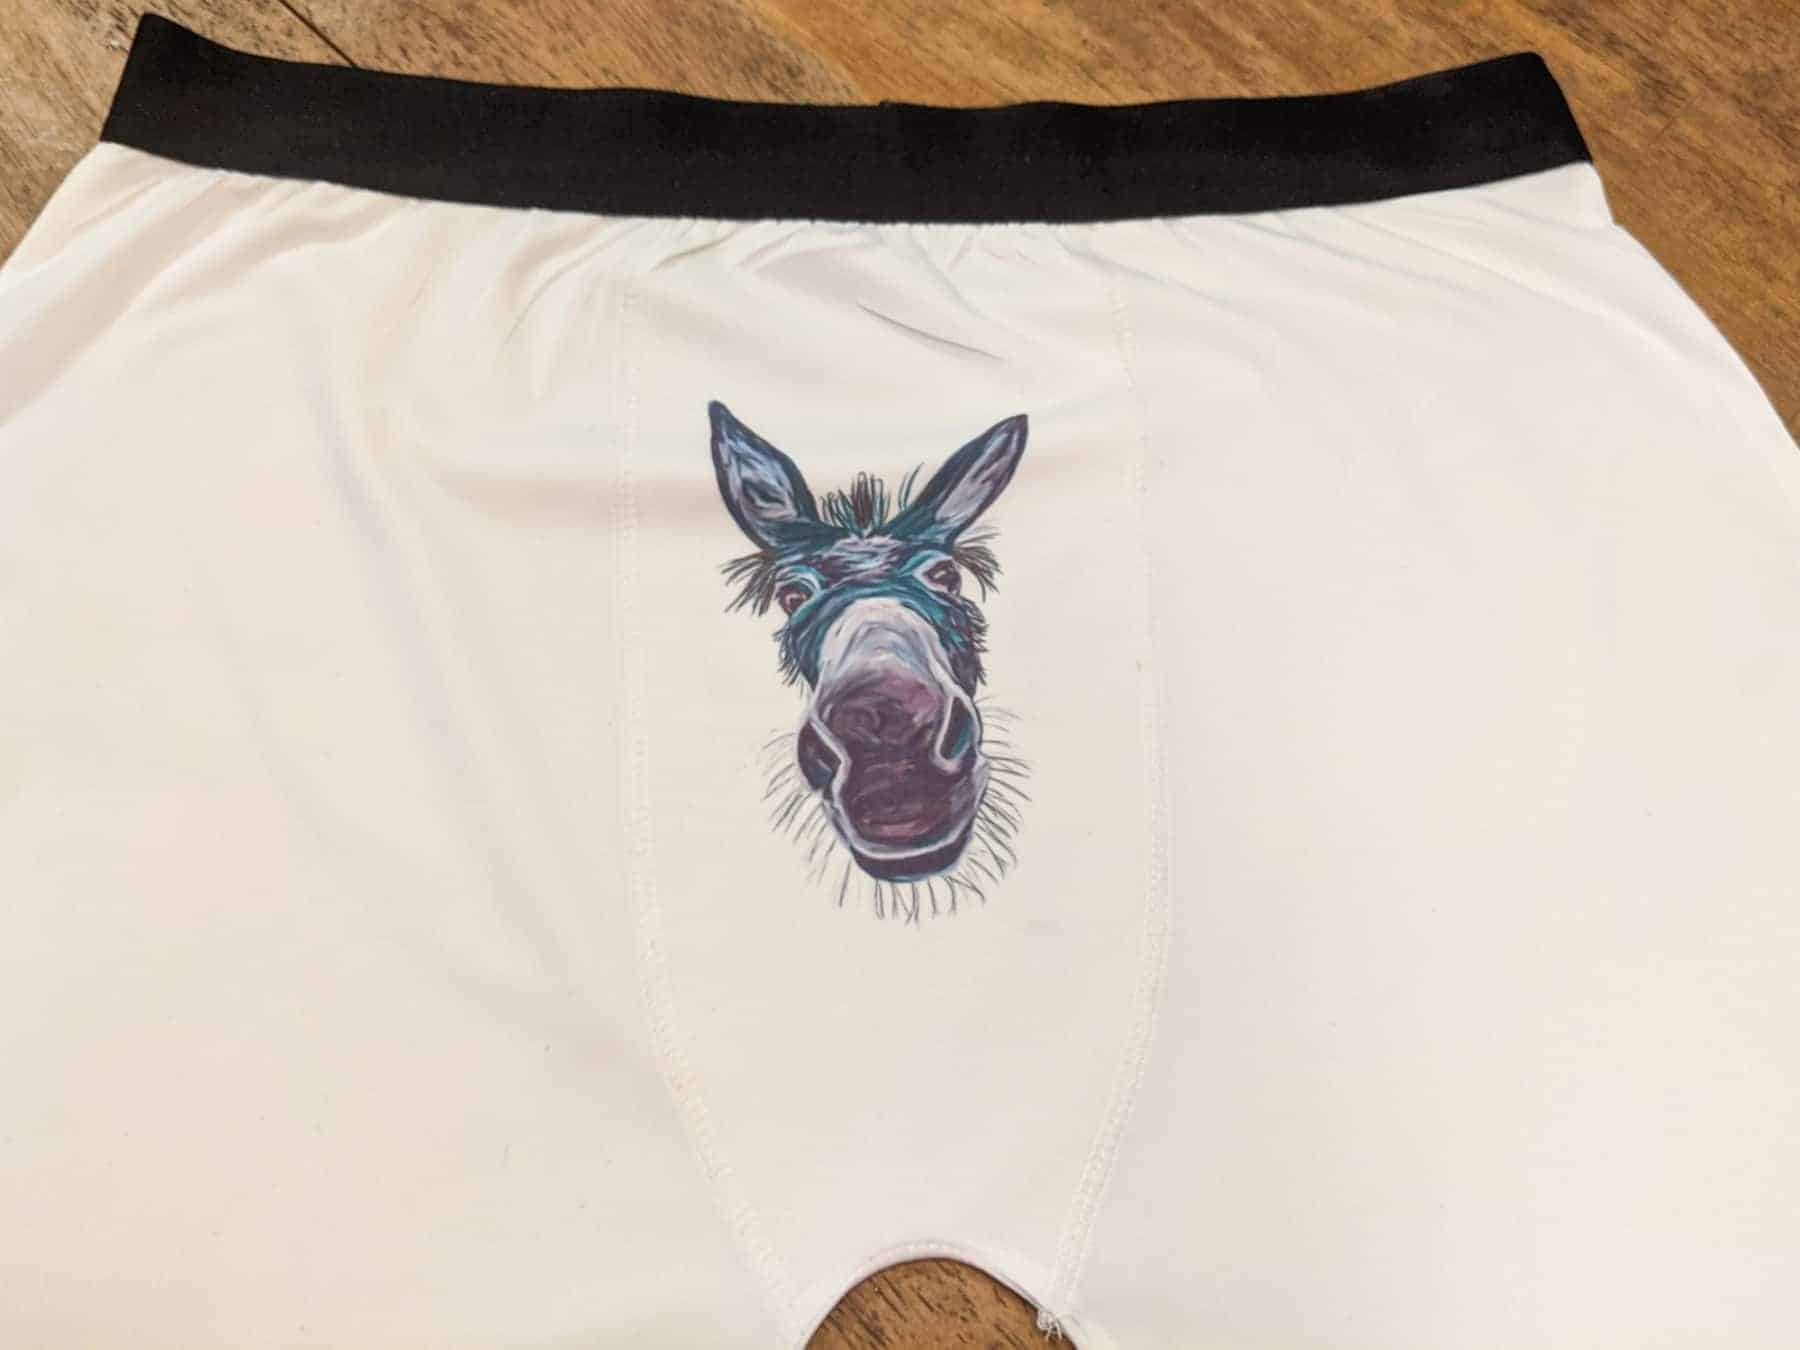 Black Band Boxer Briefs - Painted Donkey